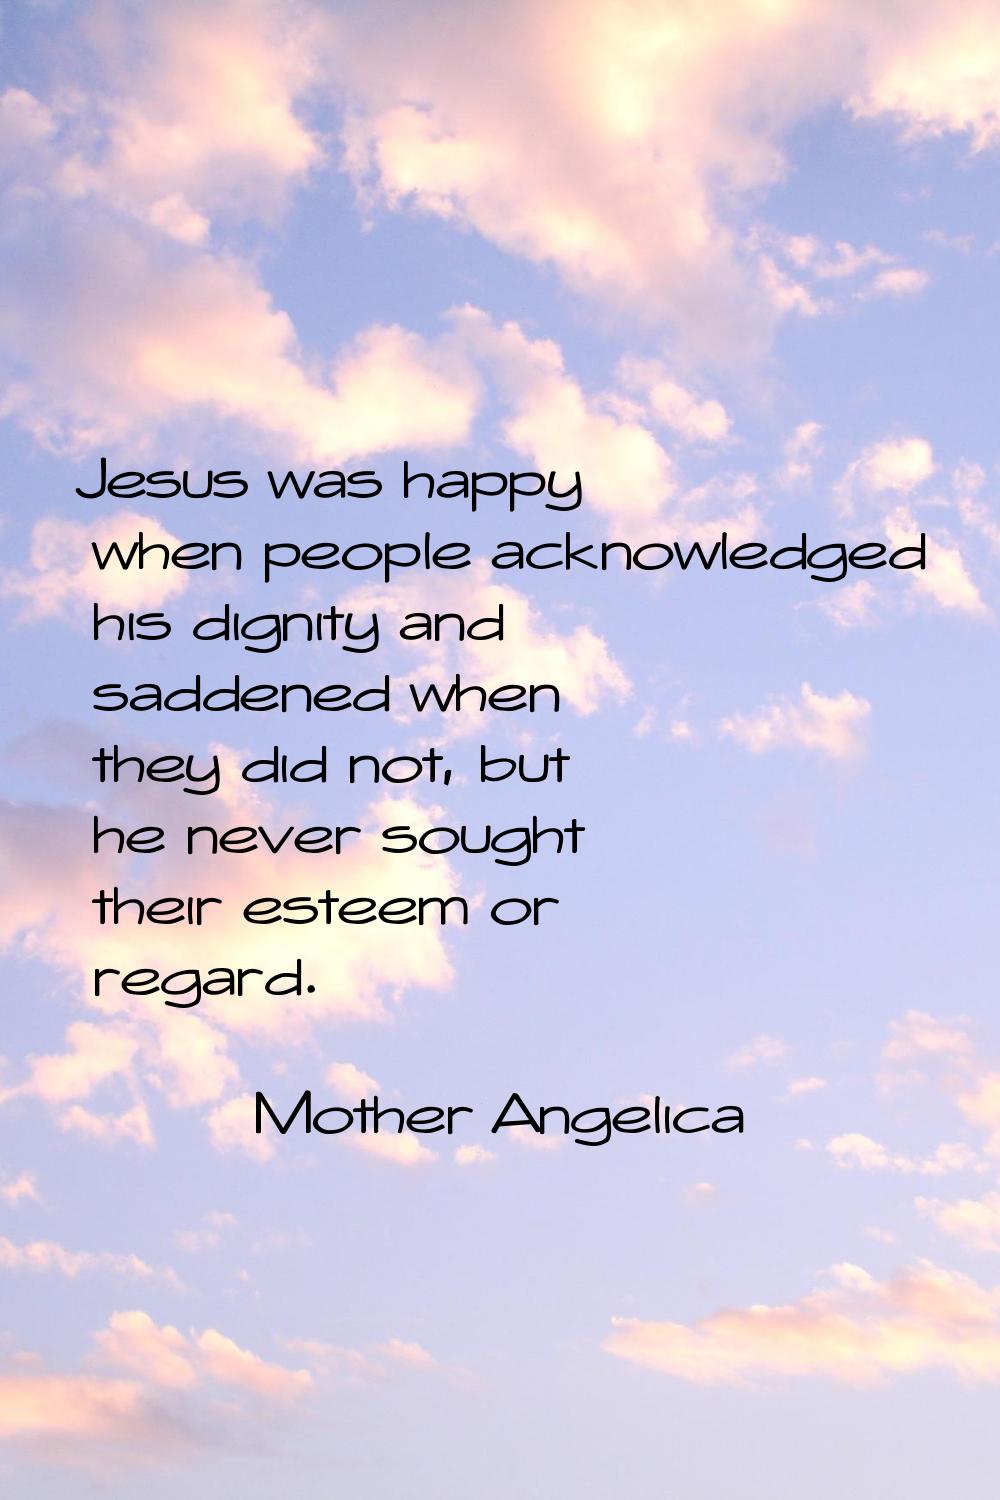 Jesus was happy when people acknowledged his dignity and saddened when they did not, but he never s